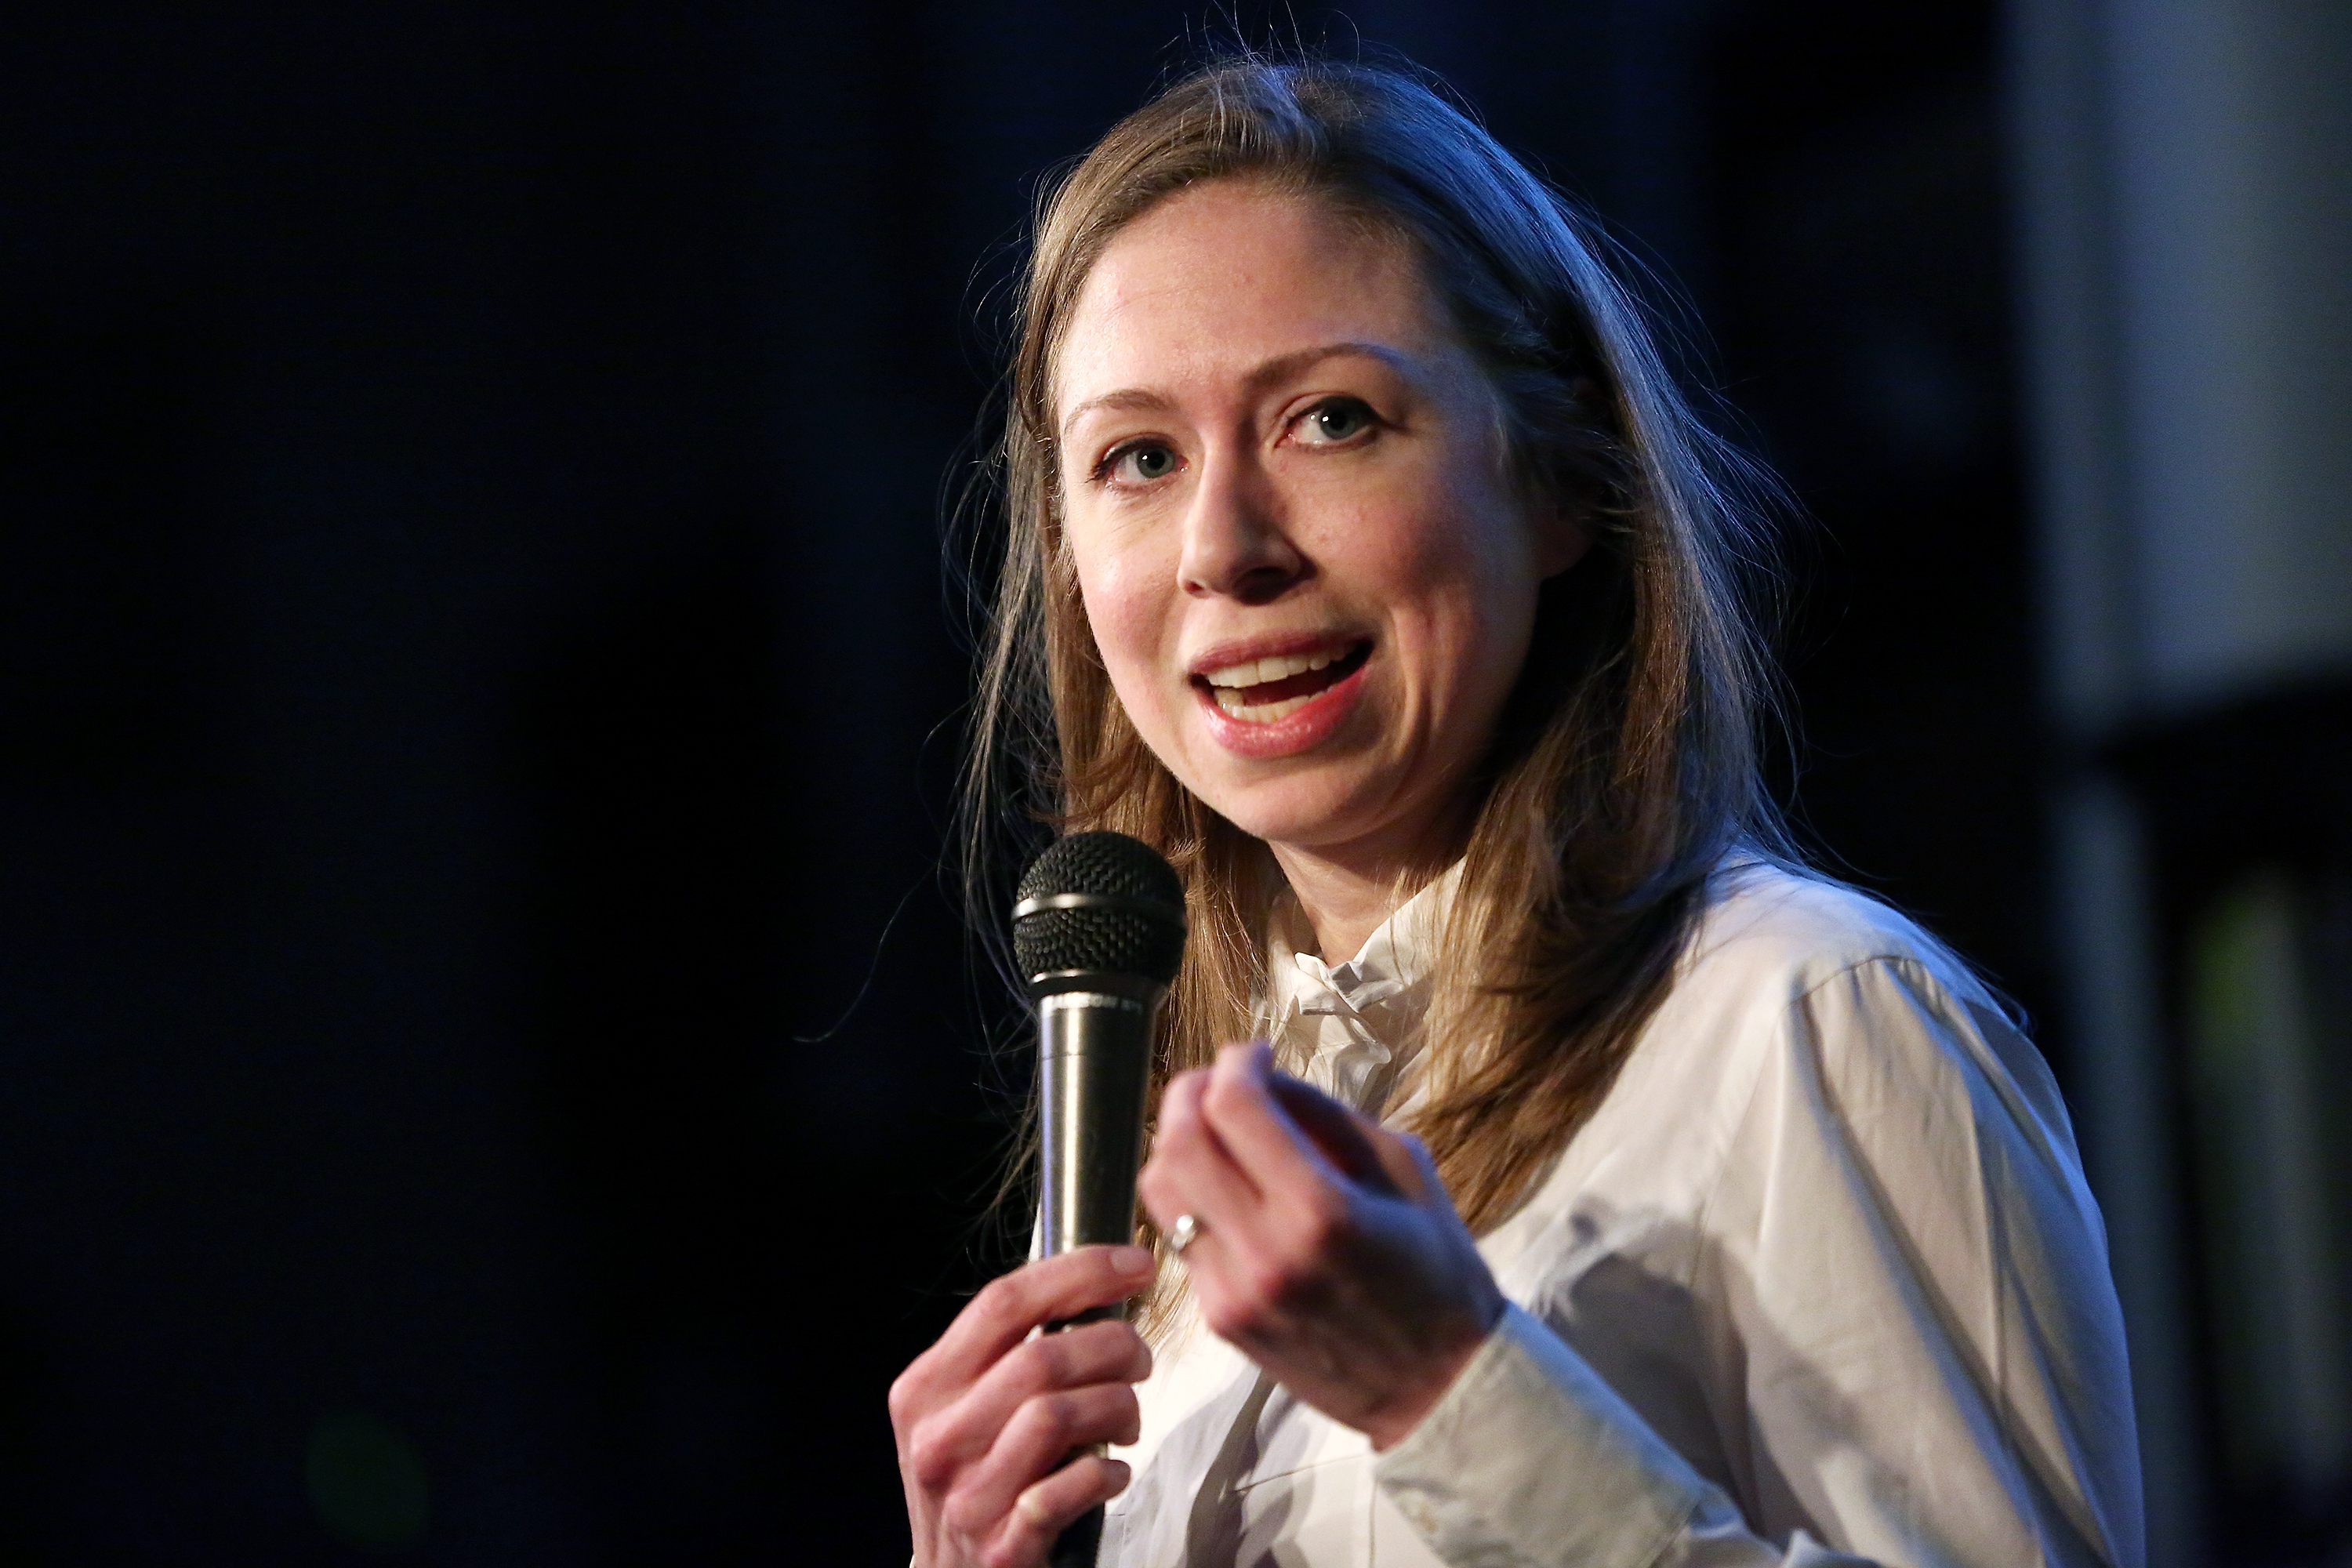 NEW YORK, NY - APRIL 04:  Chelsea Clinton speaks on stage before signing copies of her new book "It's Your World" at Housing Works Bookstore on April 4, 2017 in New York City.  (Photo by Monica Schipper/Getty Images) (Monica Schipper&mdash;Getty Images)